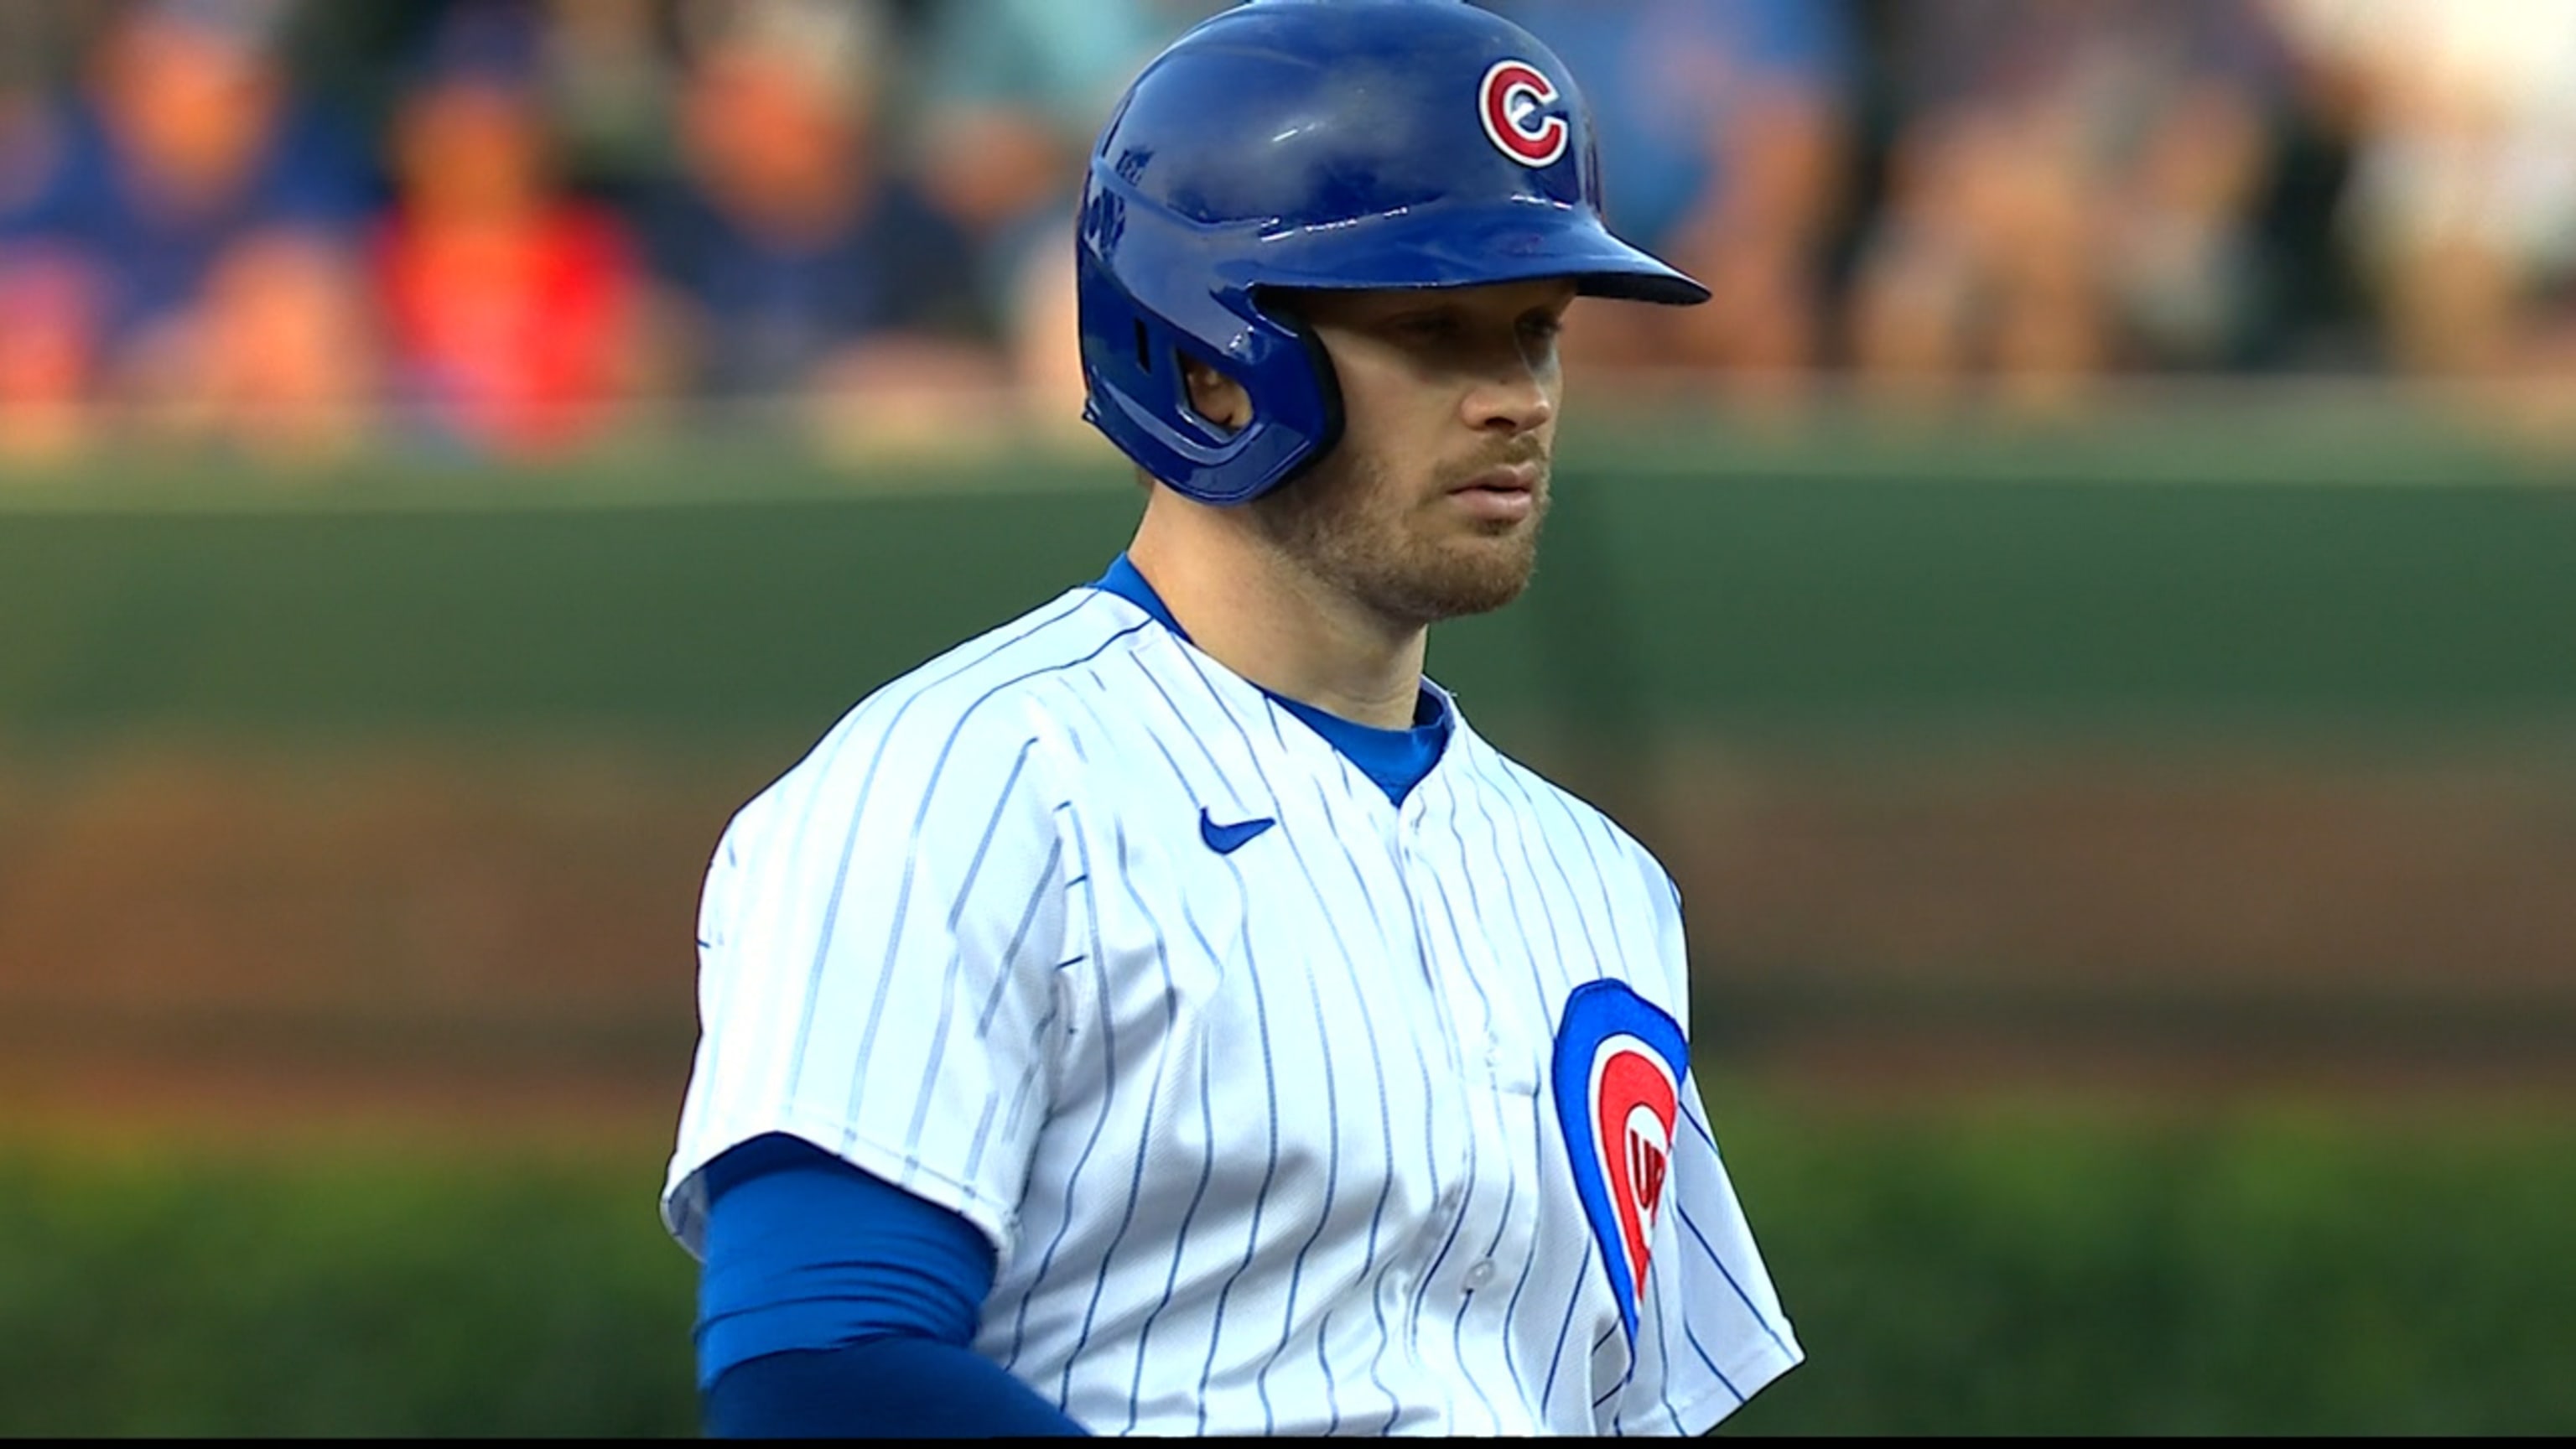 Cubs secure series win over Reds